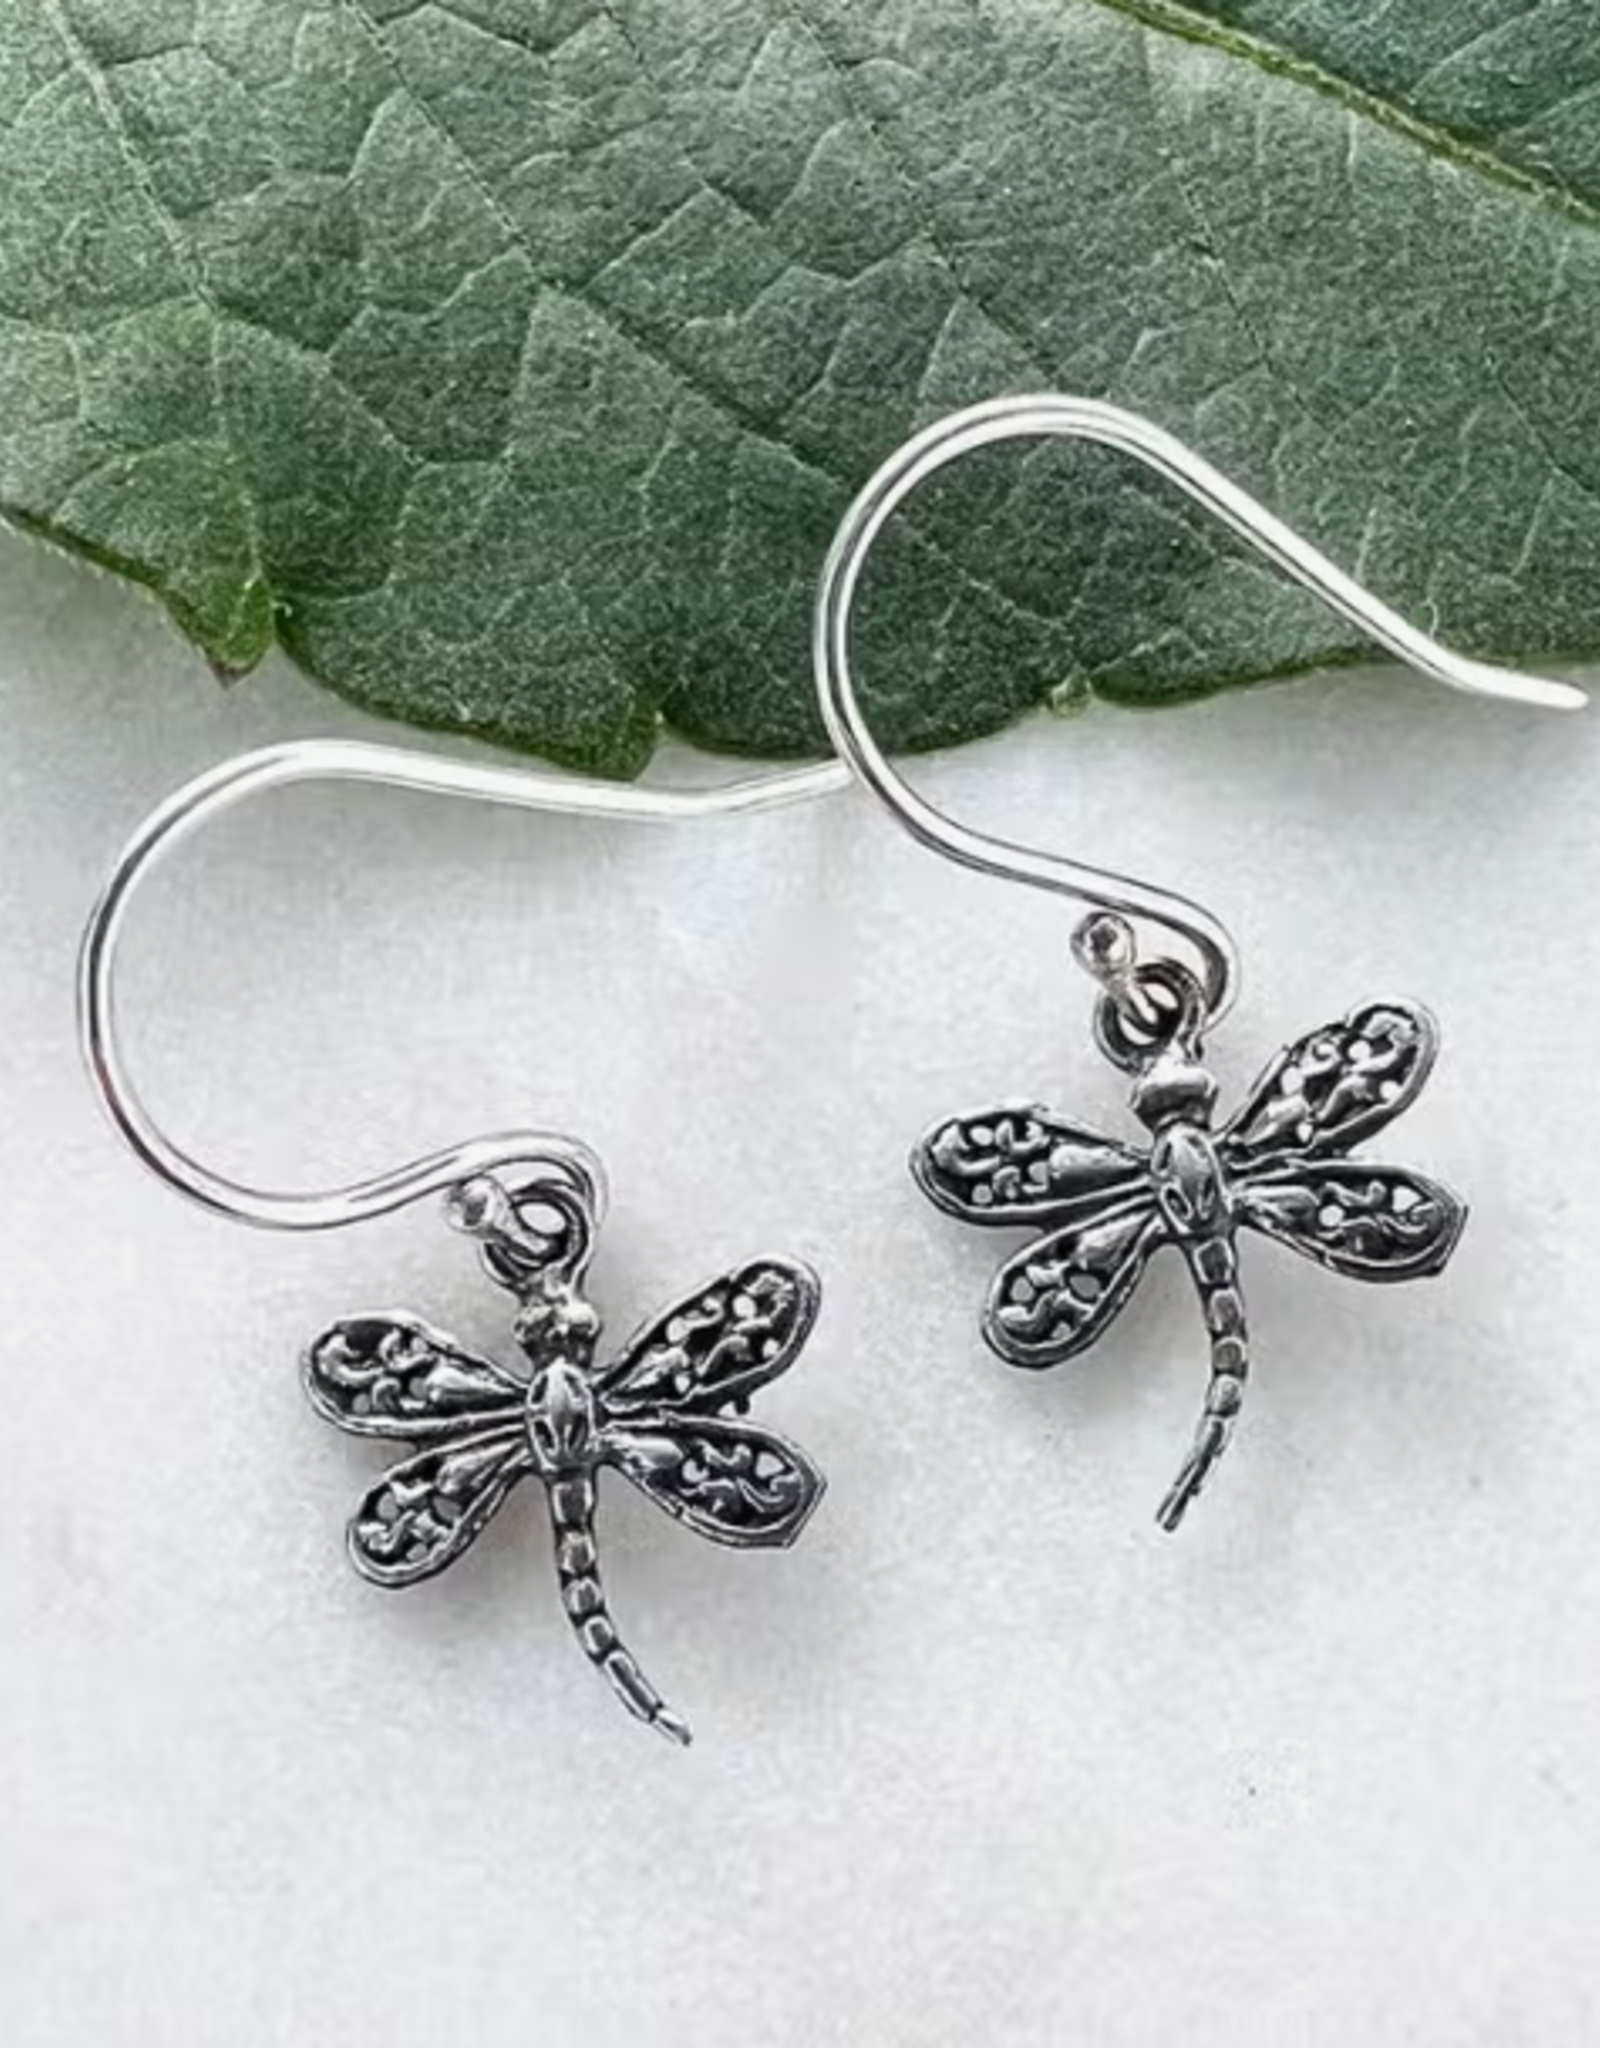 Women's Peace Collection Petit Dragonfly Earrings